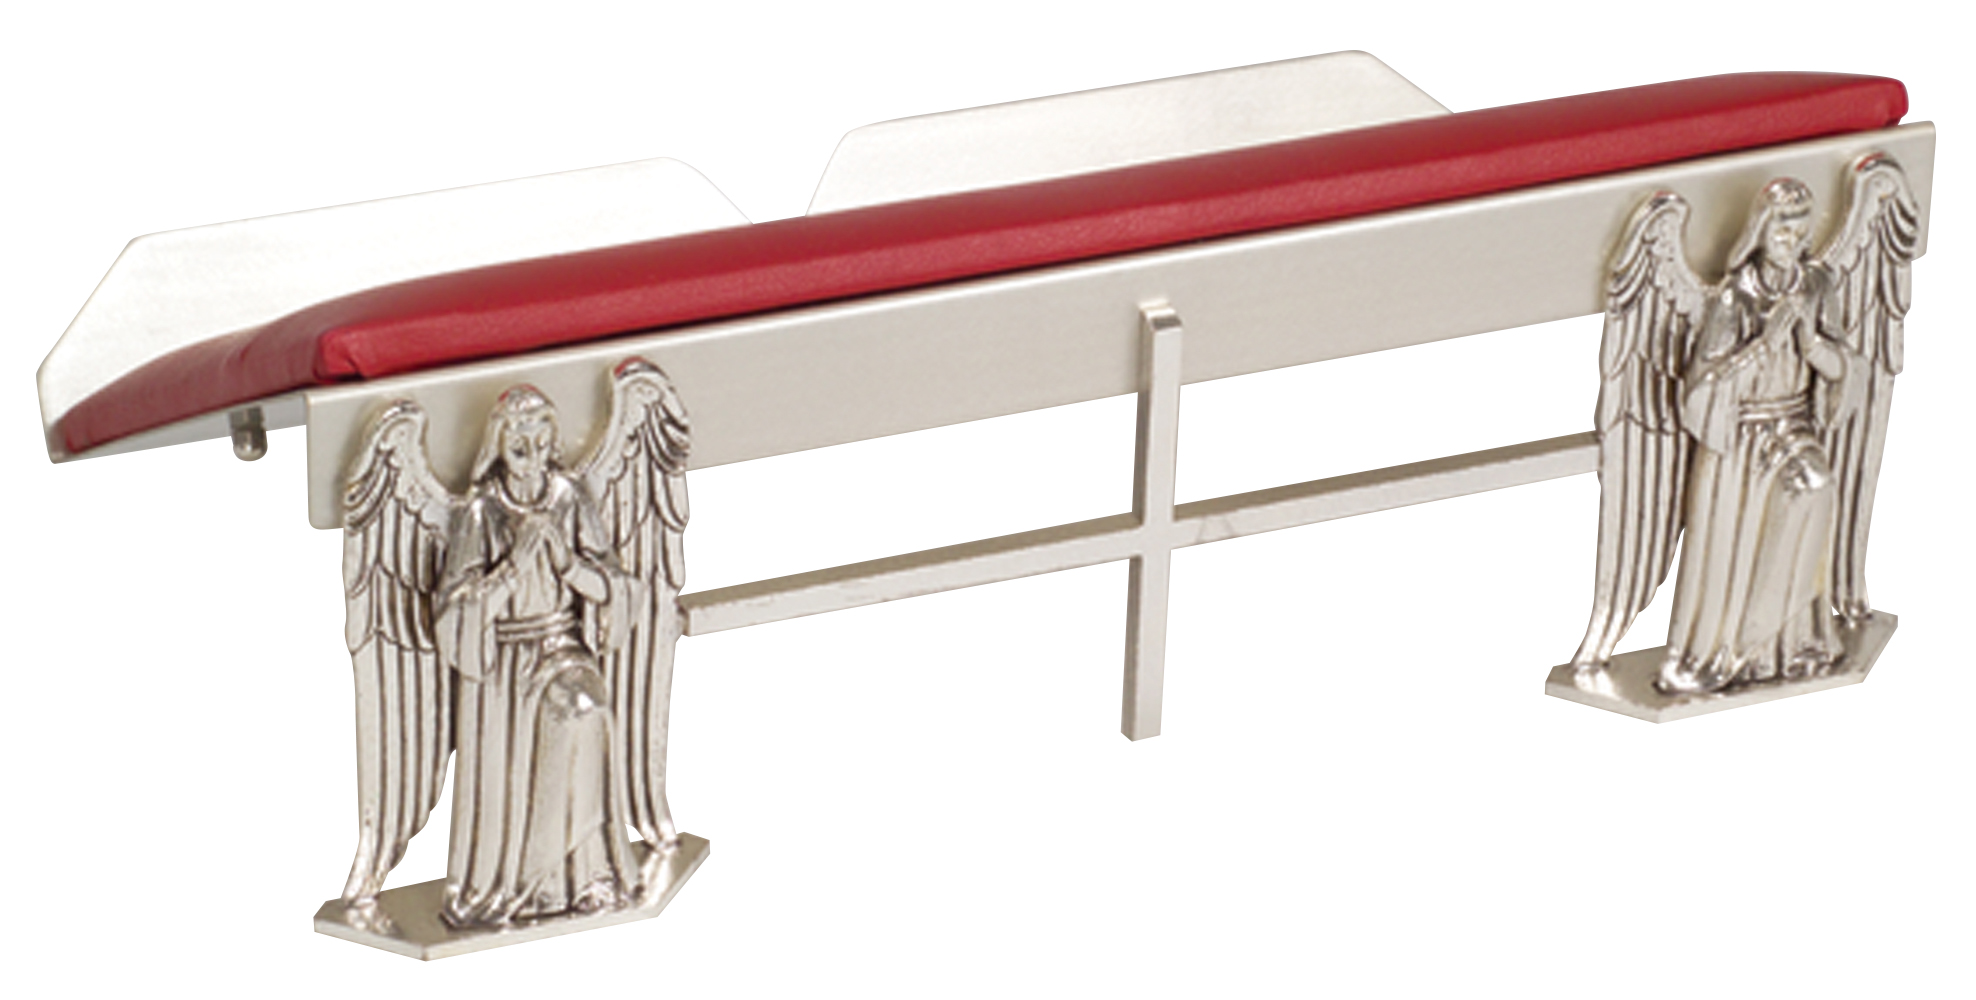 Missal Stand 15 x 10 in Red Padded Silver Plate